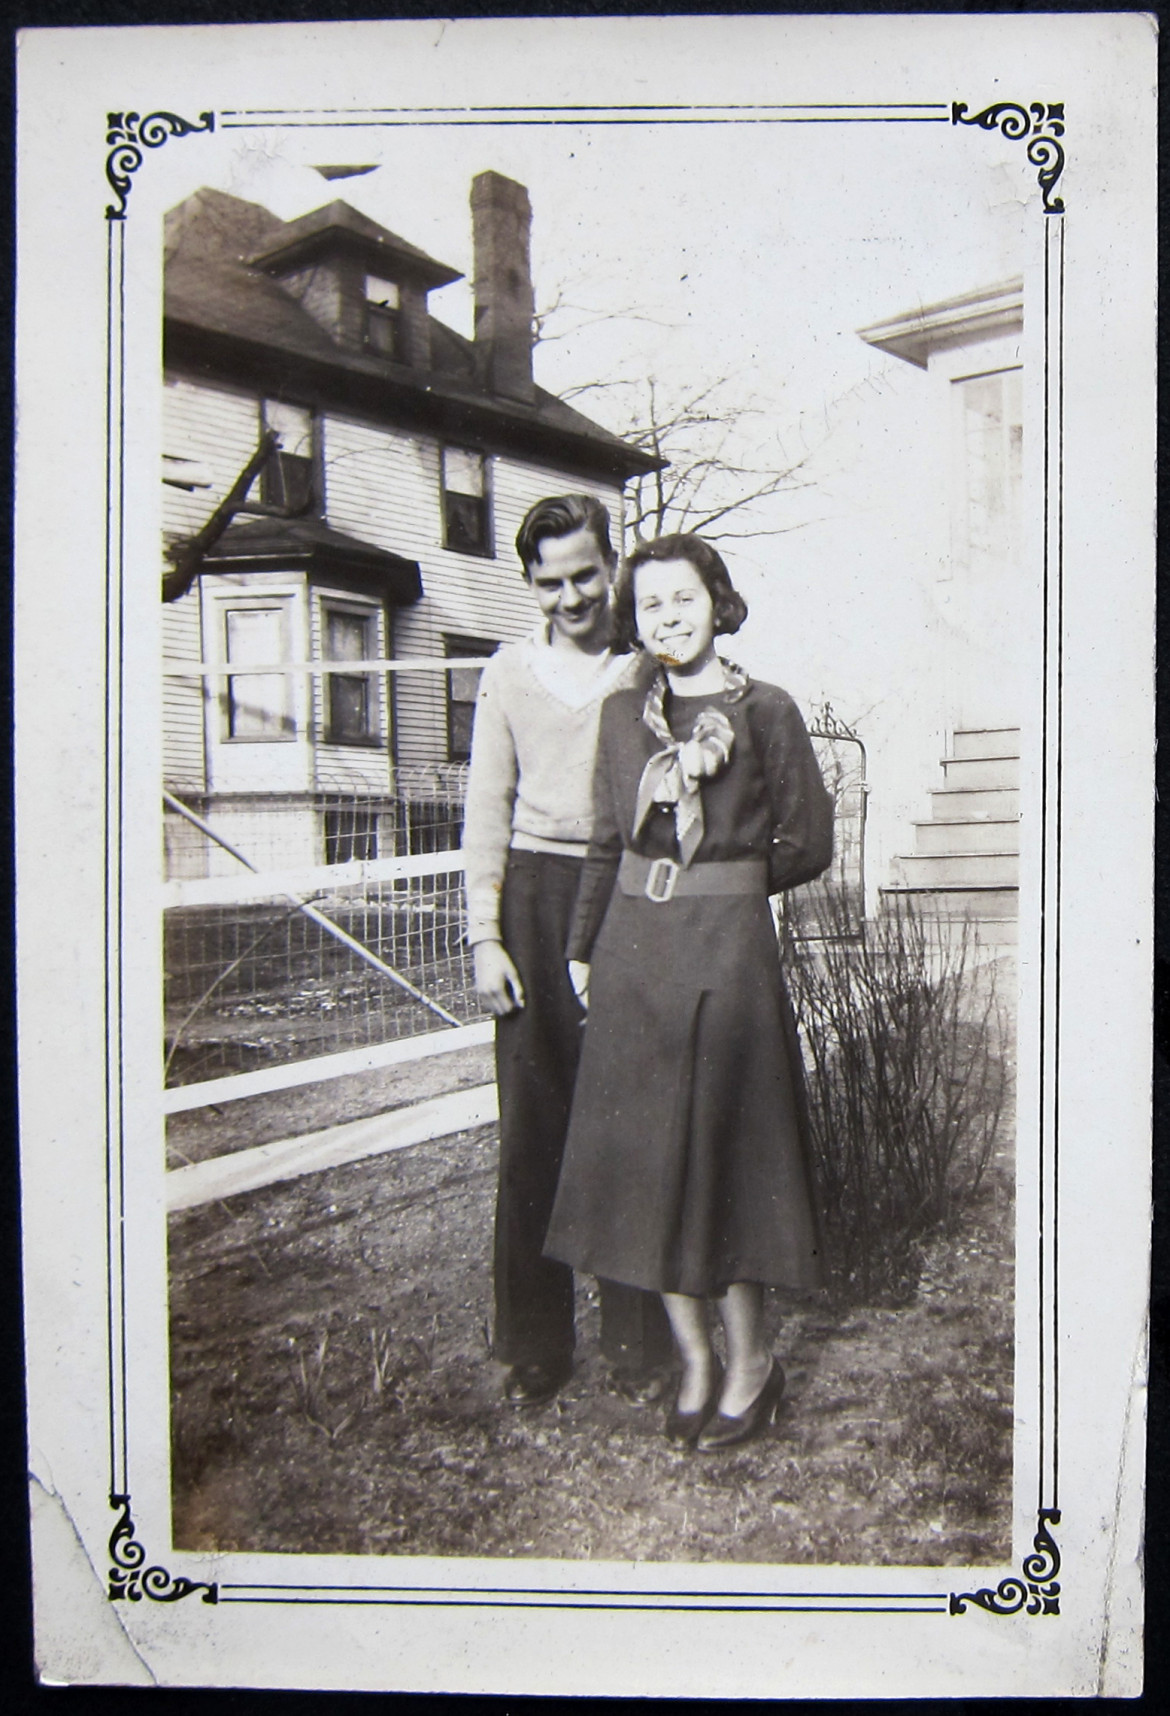 Marjorie with an unidentified friend with the neighbor's home in the rear.